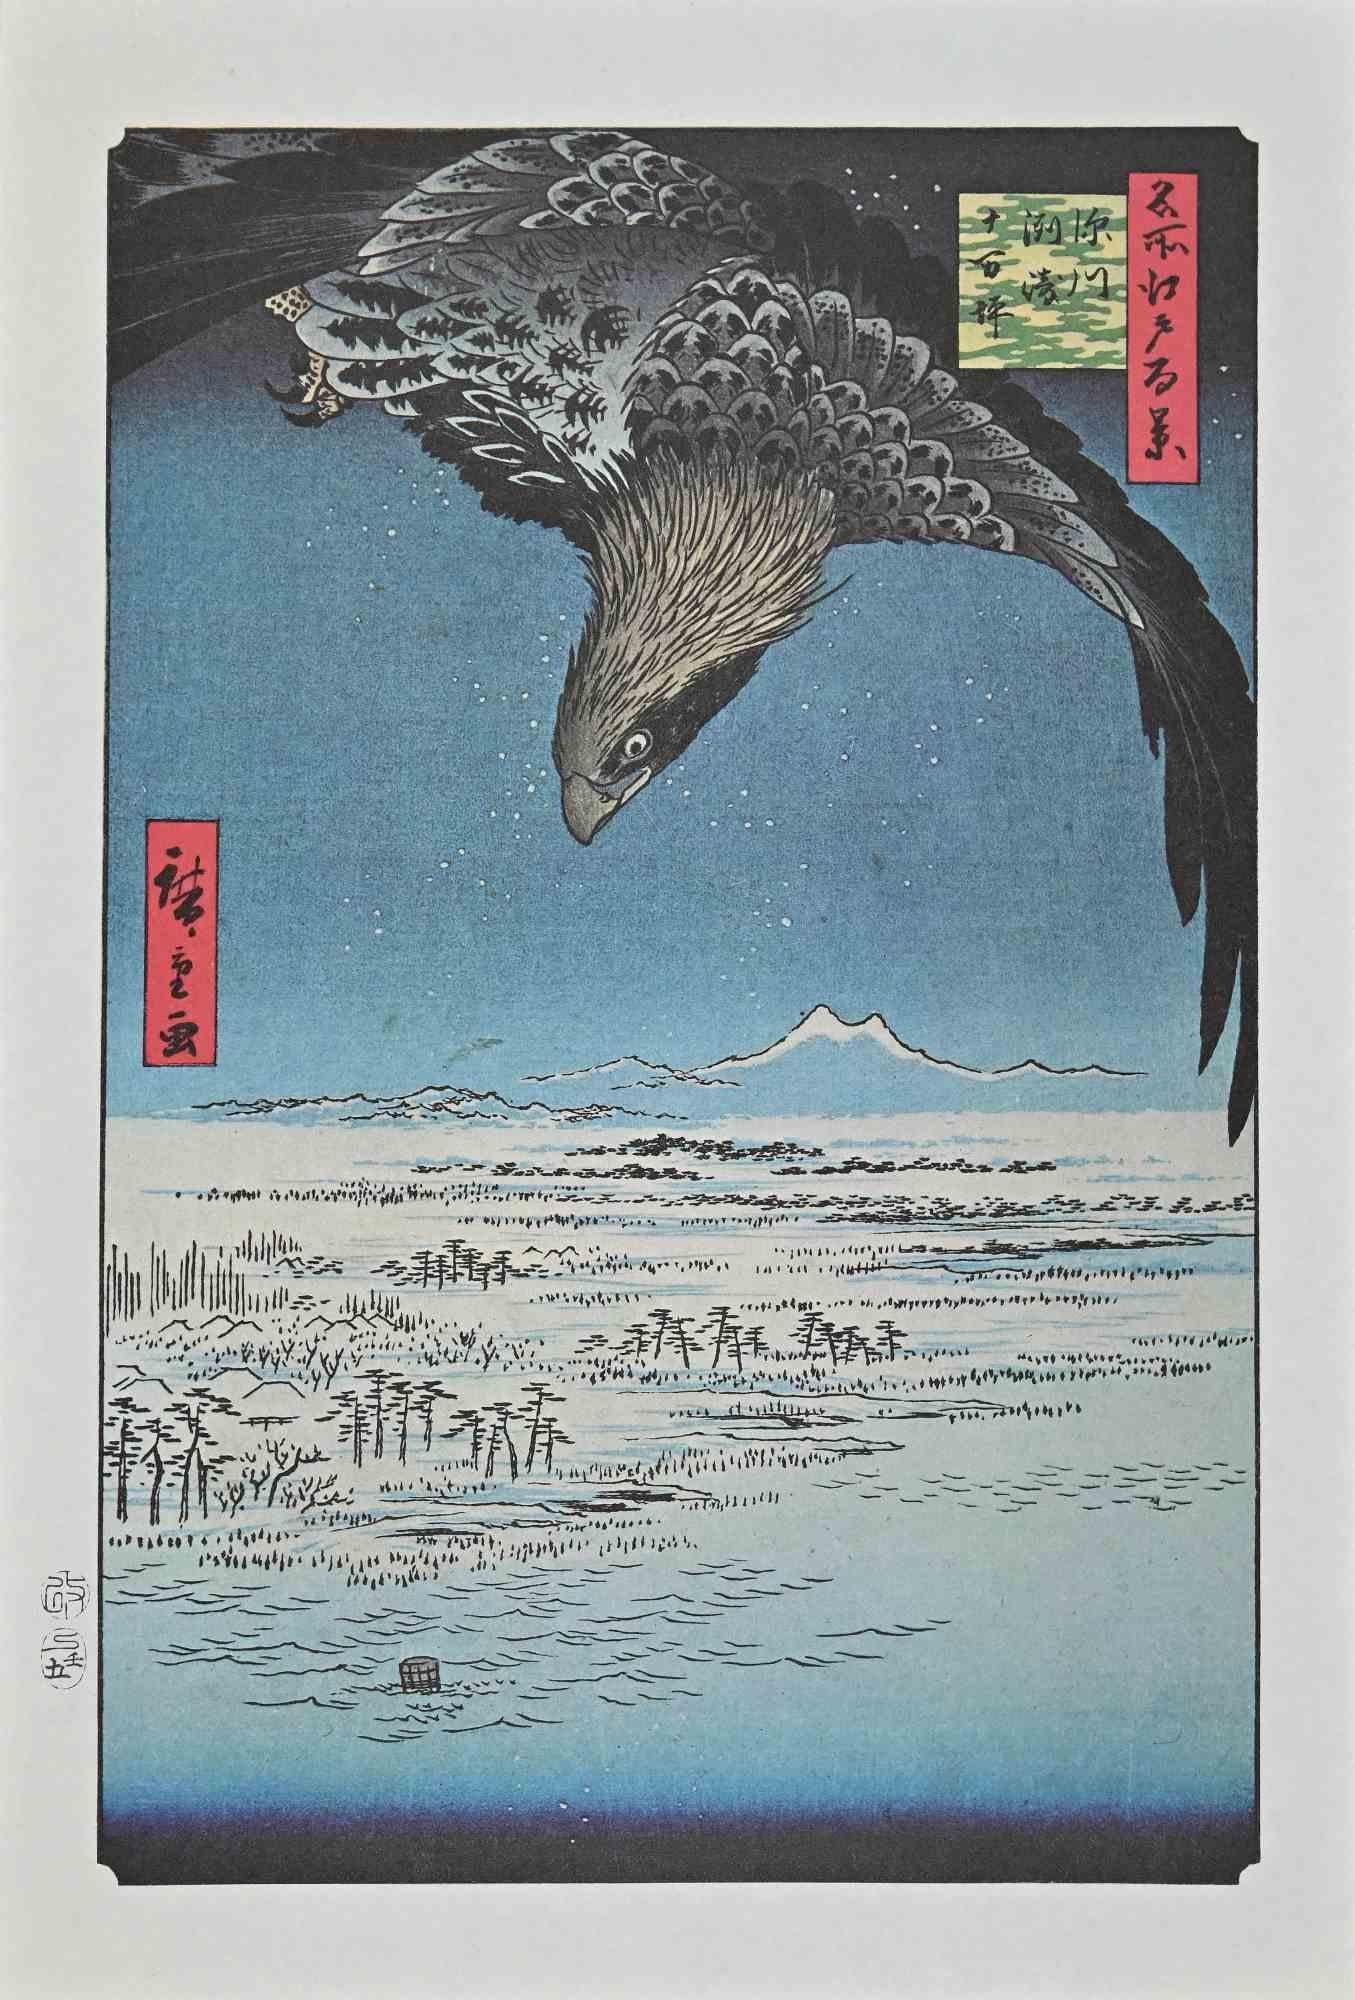 Praying in The Snow is a modern print realized in the Mid-20th Century.

Mixed colored lithograph after a woodcut realized by the great Japanese artist Utagawa Hiroshige in the 19th century.

Very Good conditions.

Utagawa Hiroshige, also known as 